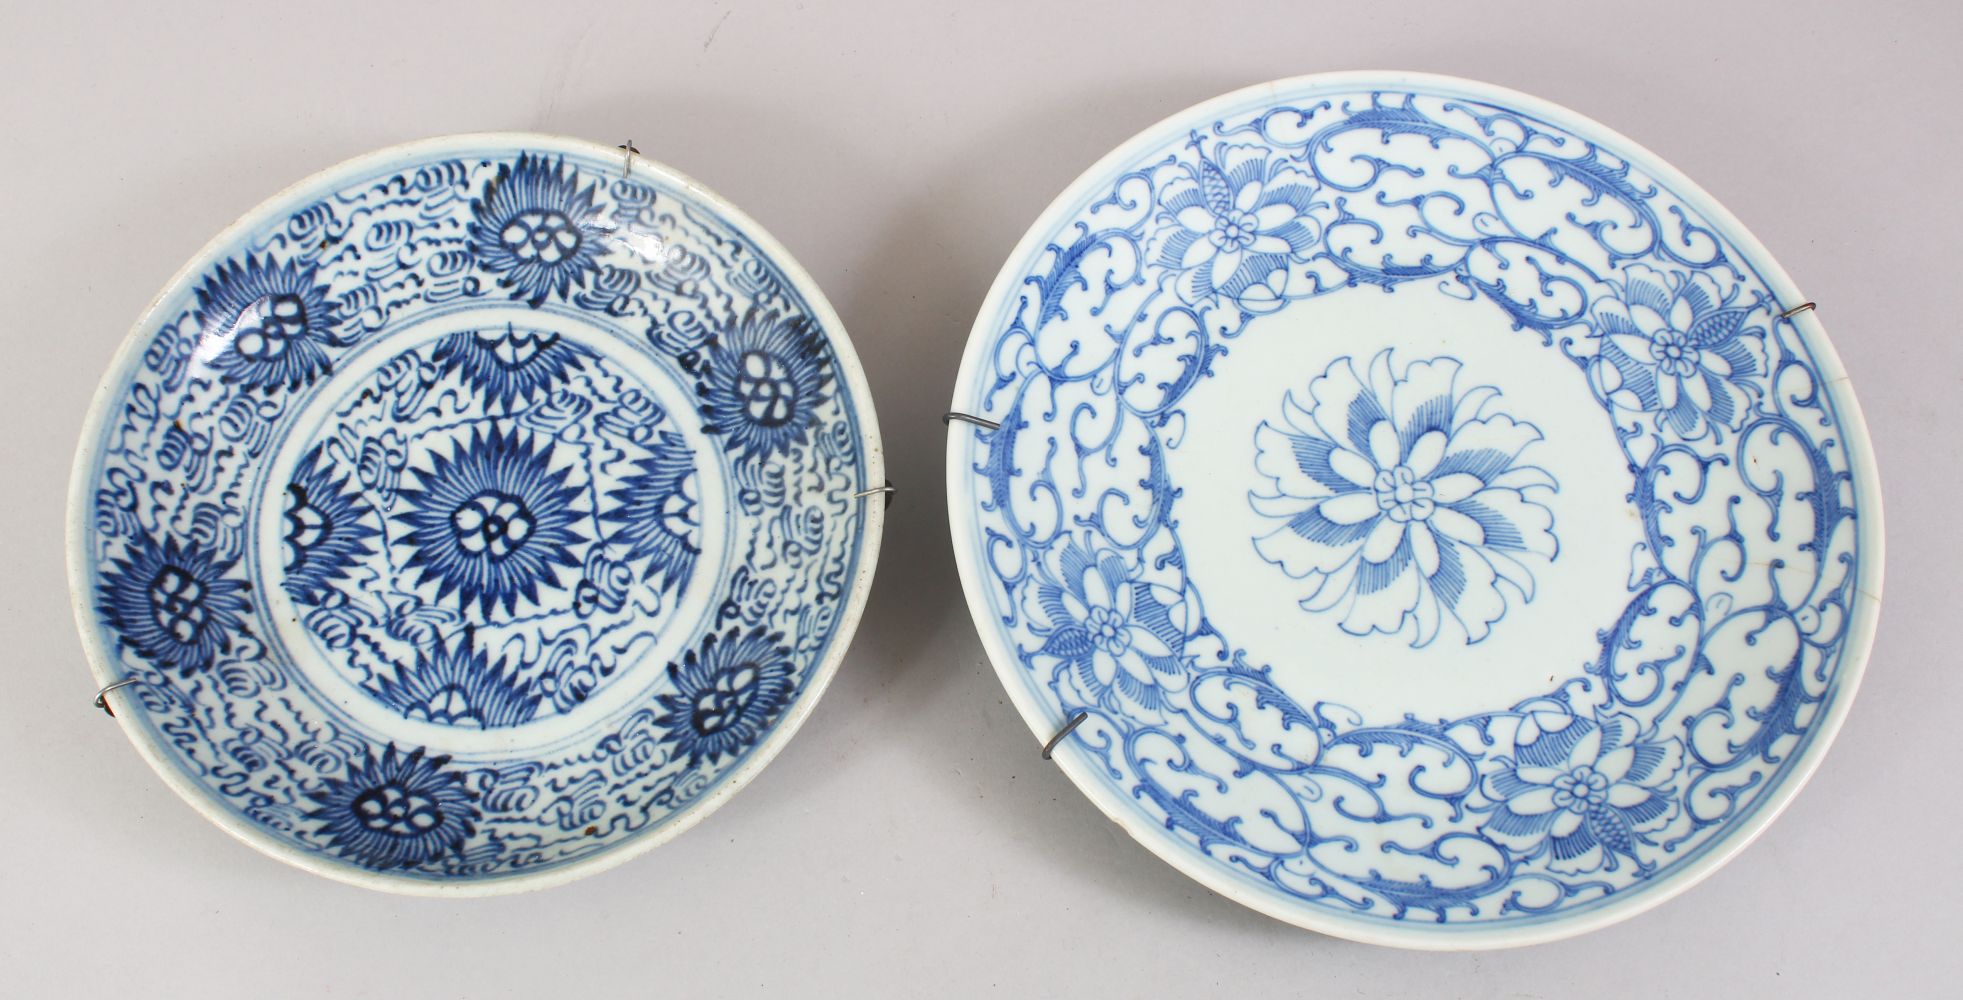 TWO 19TH / 20TH CENTURY CHINESE BLUE & WHITE PORCELAIN PLATES, each with formal scrolling foliage